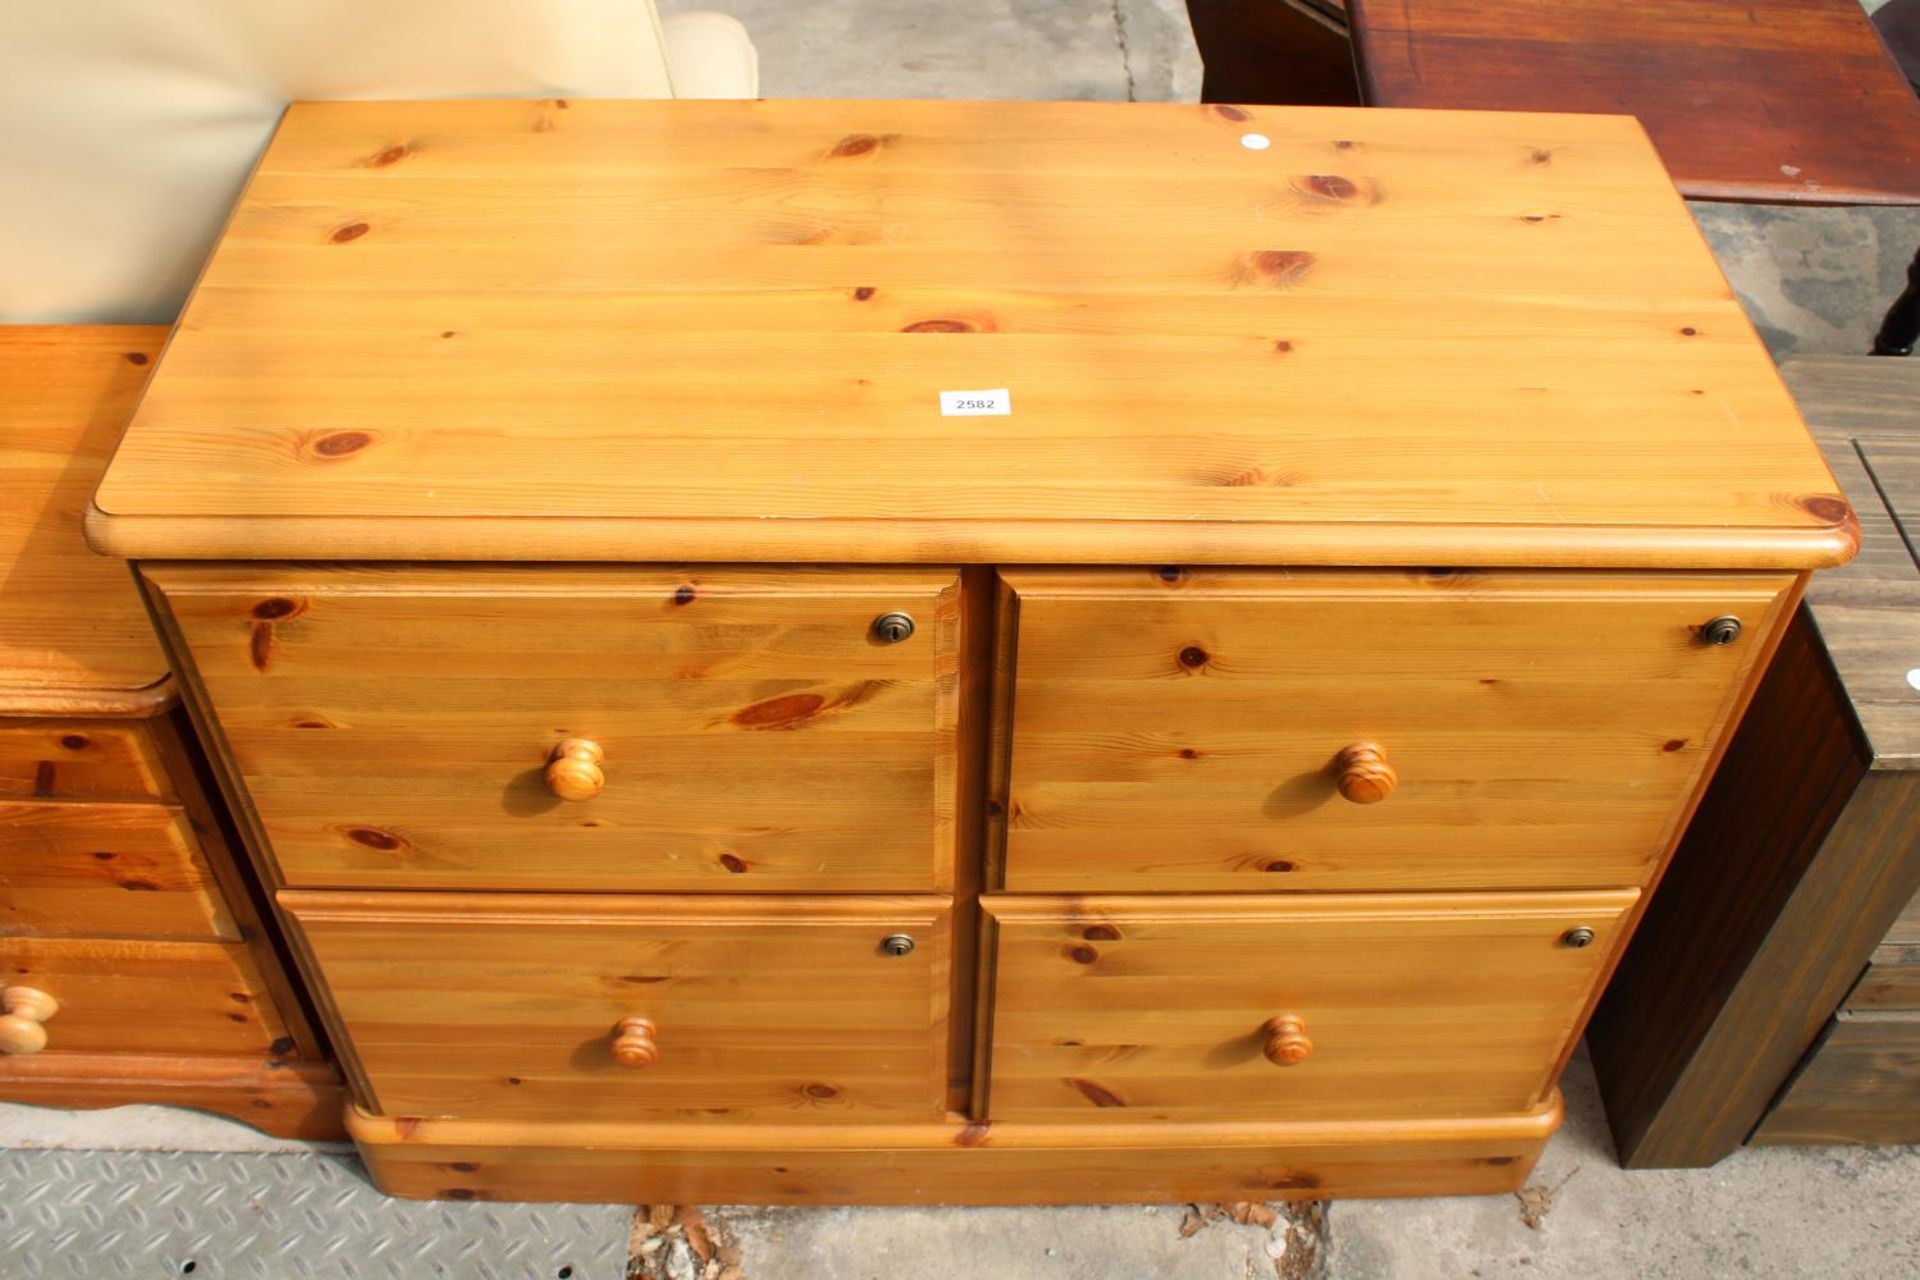 A MODERN PINE 4 DRAWER FILING CABINET, 38" WIDE